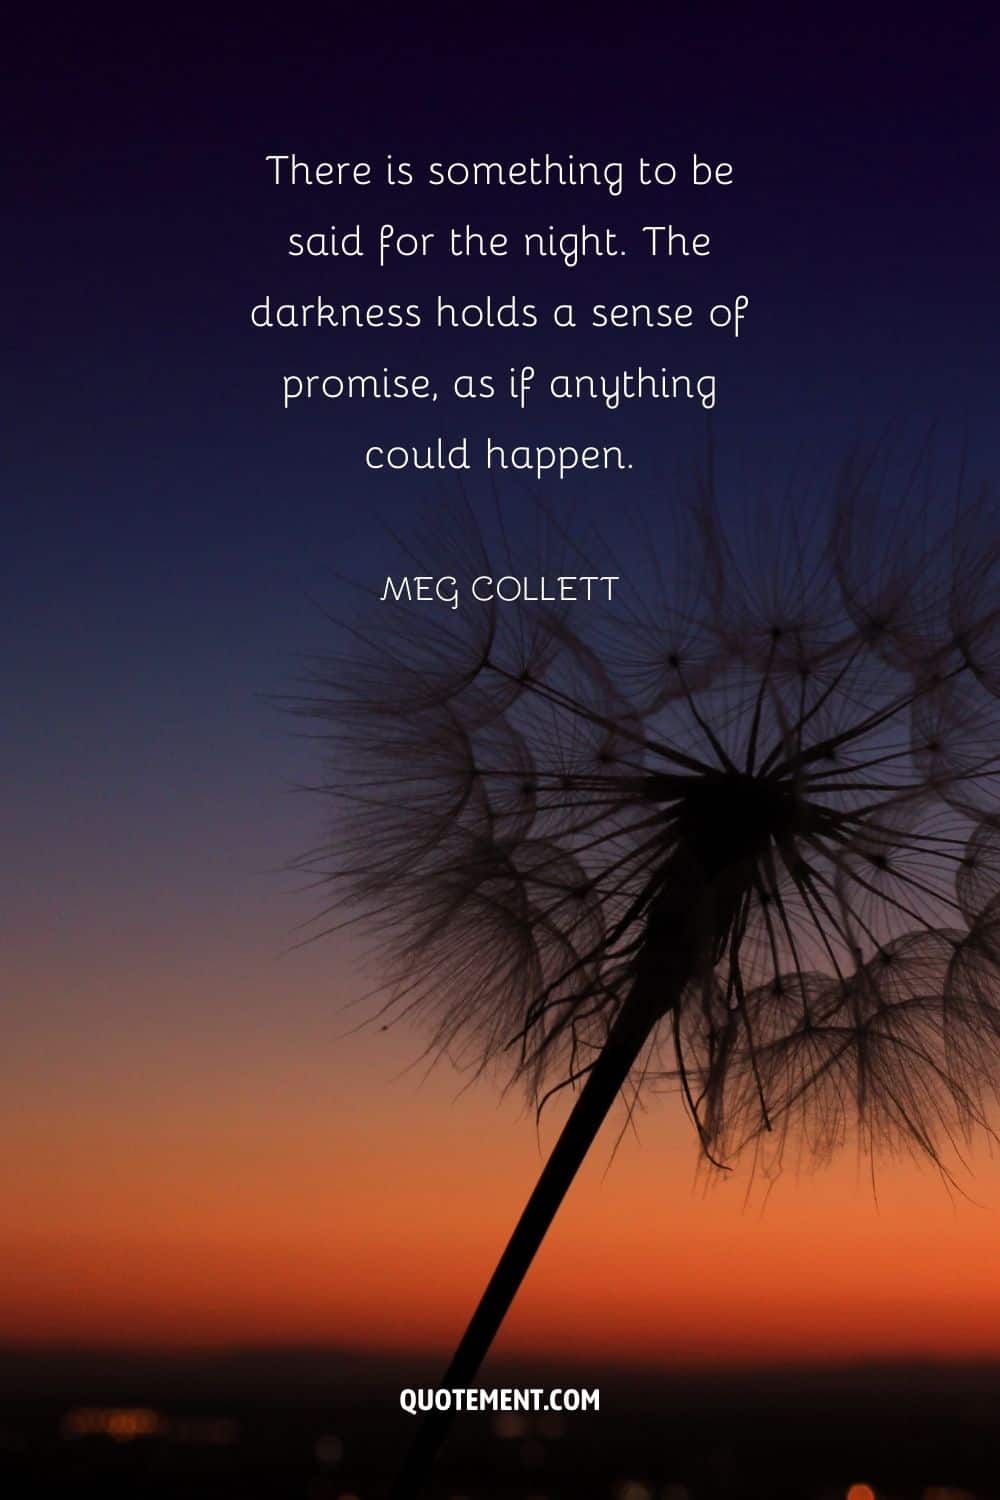 image of dandelion representing wonderful quote for night